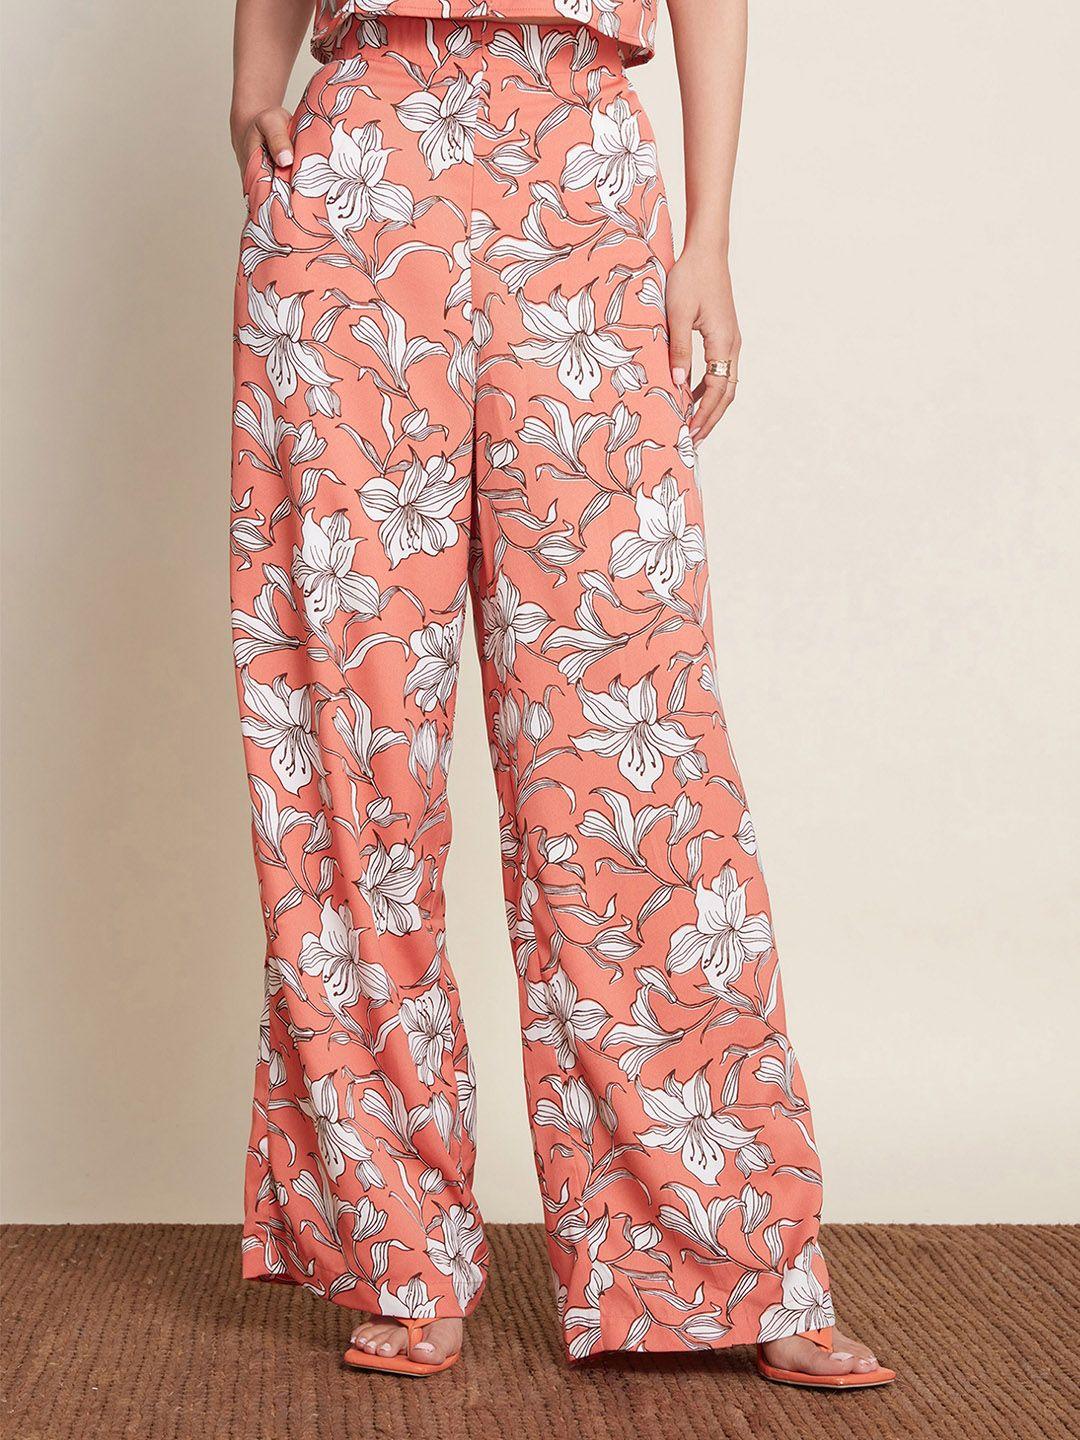 20dresses women floral printed comfort trousers